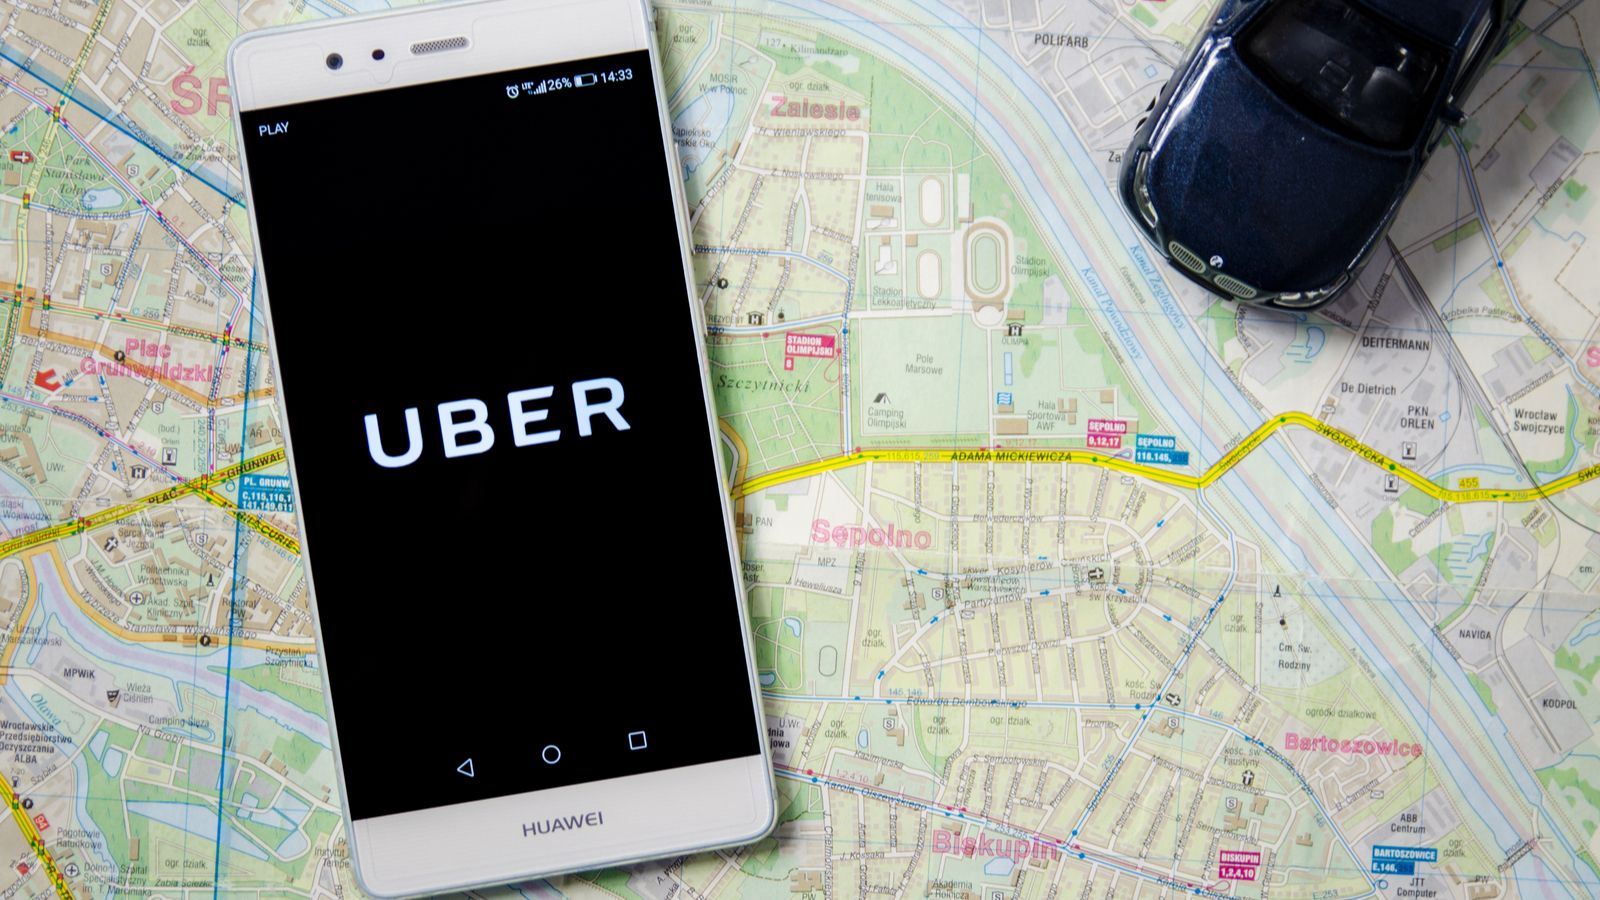 The Uber (UBER) logo is displayed on a smartphone on top of a map background.